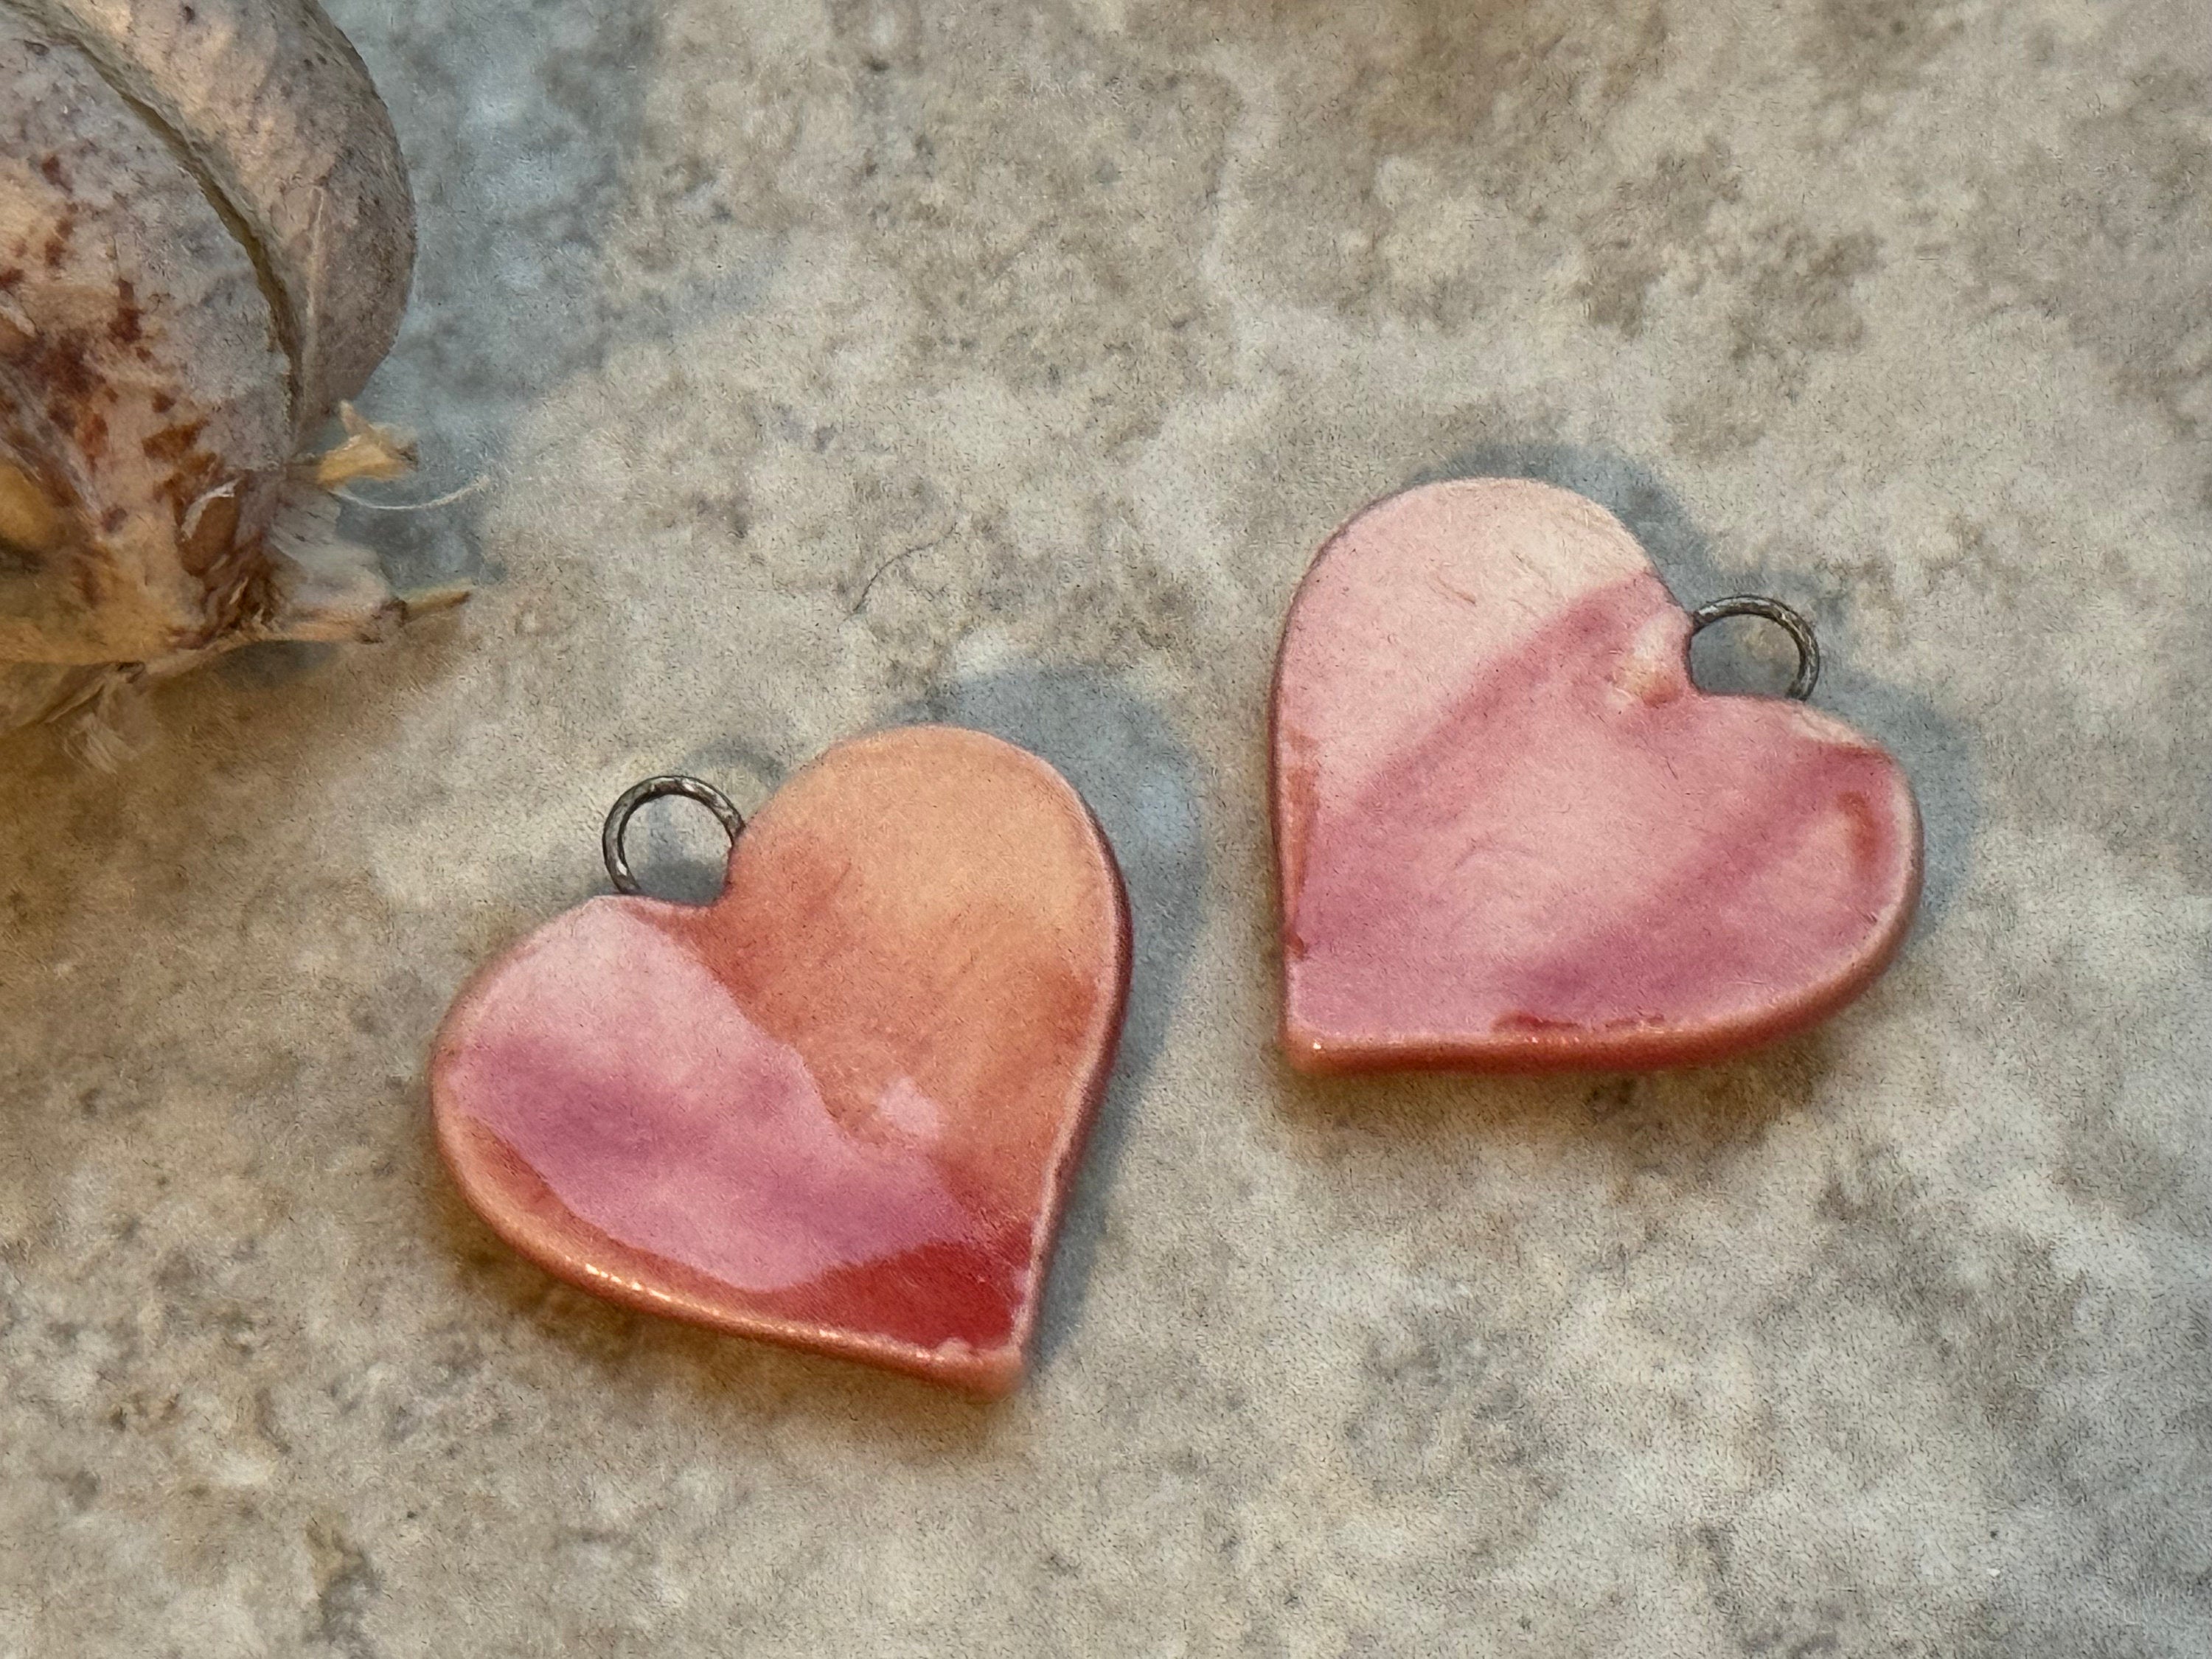 SECOND Red Hearts and Butterfly Earring Bead Pair, Hearts, Porcelain Ceramic Charms, Jewelry Making Components, Beading Handmade